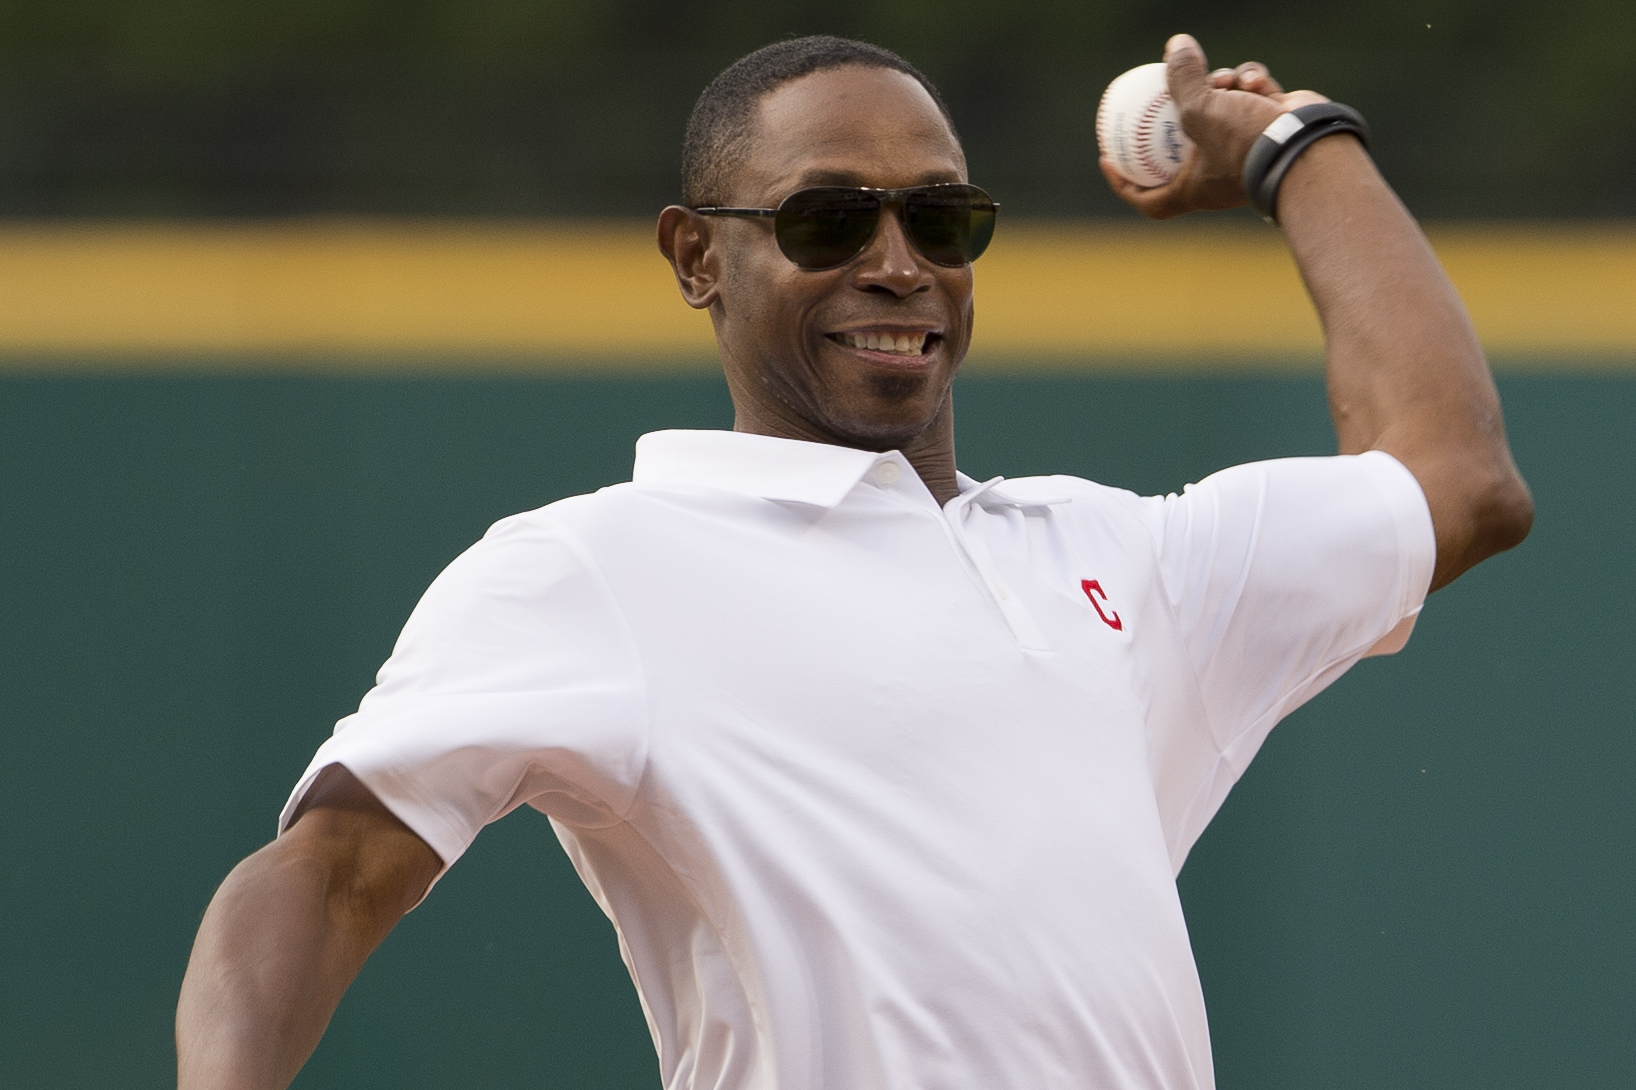 Catching Up With Former Baseball All-Star Kenny Lofton, Now A Film